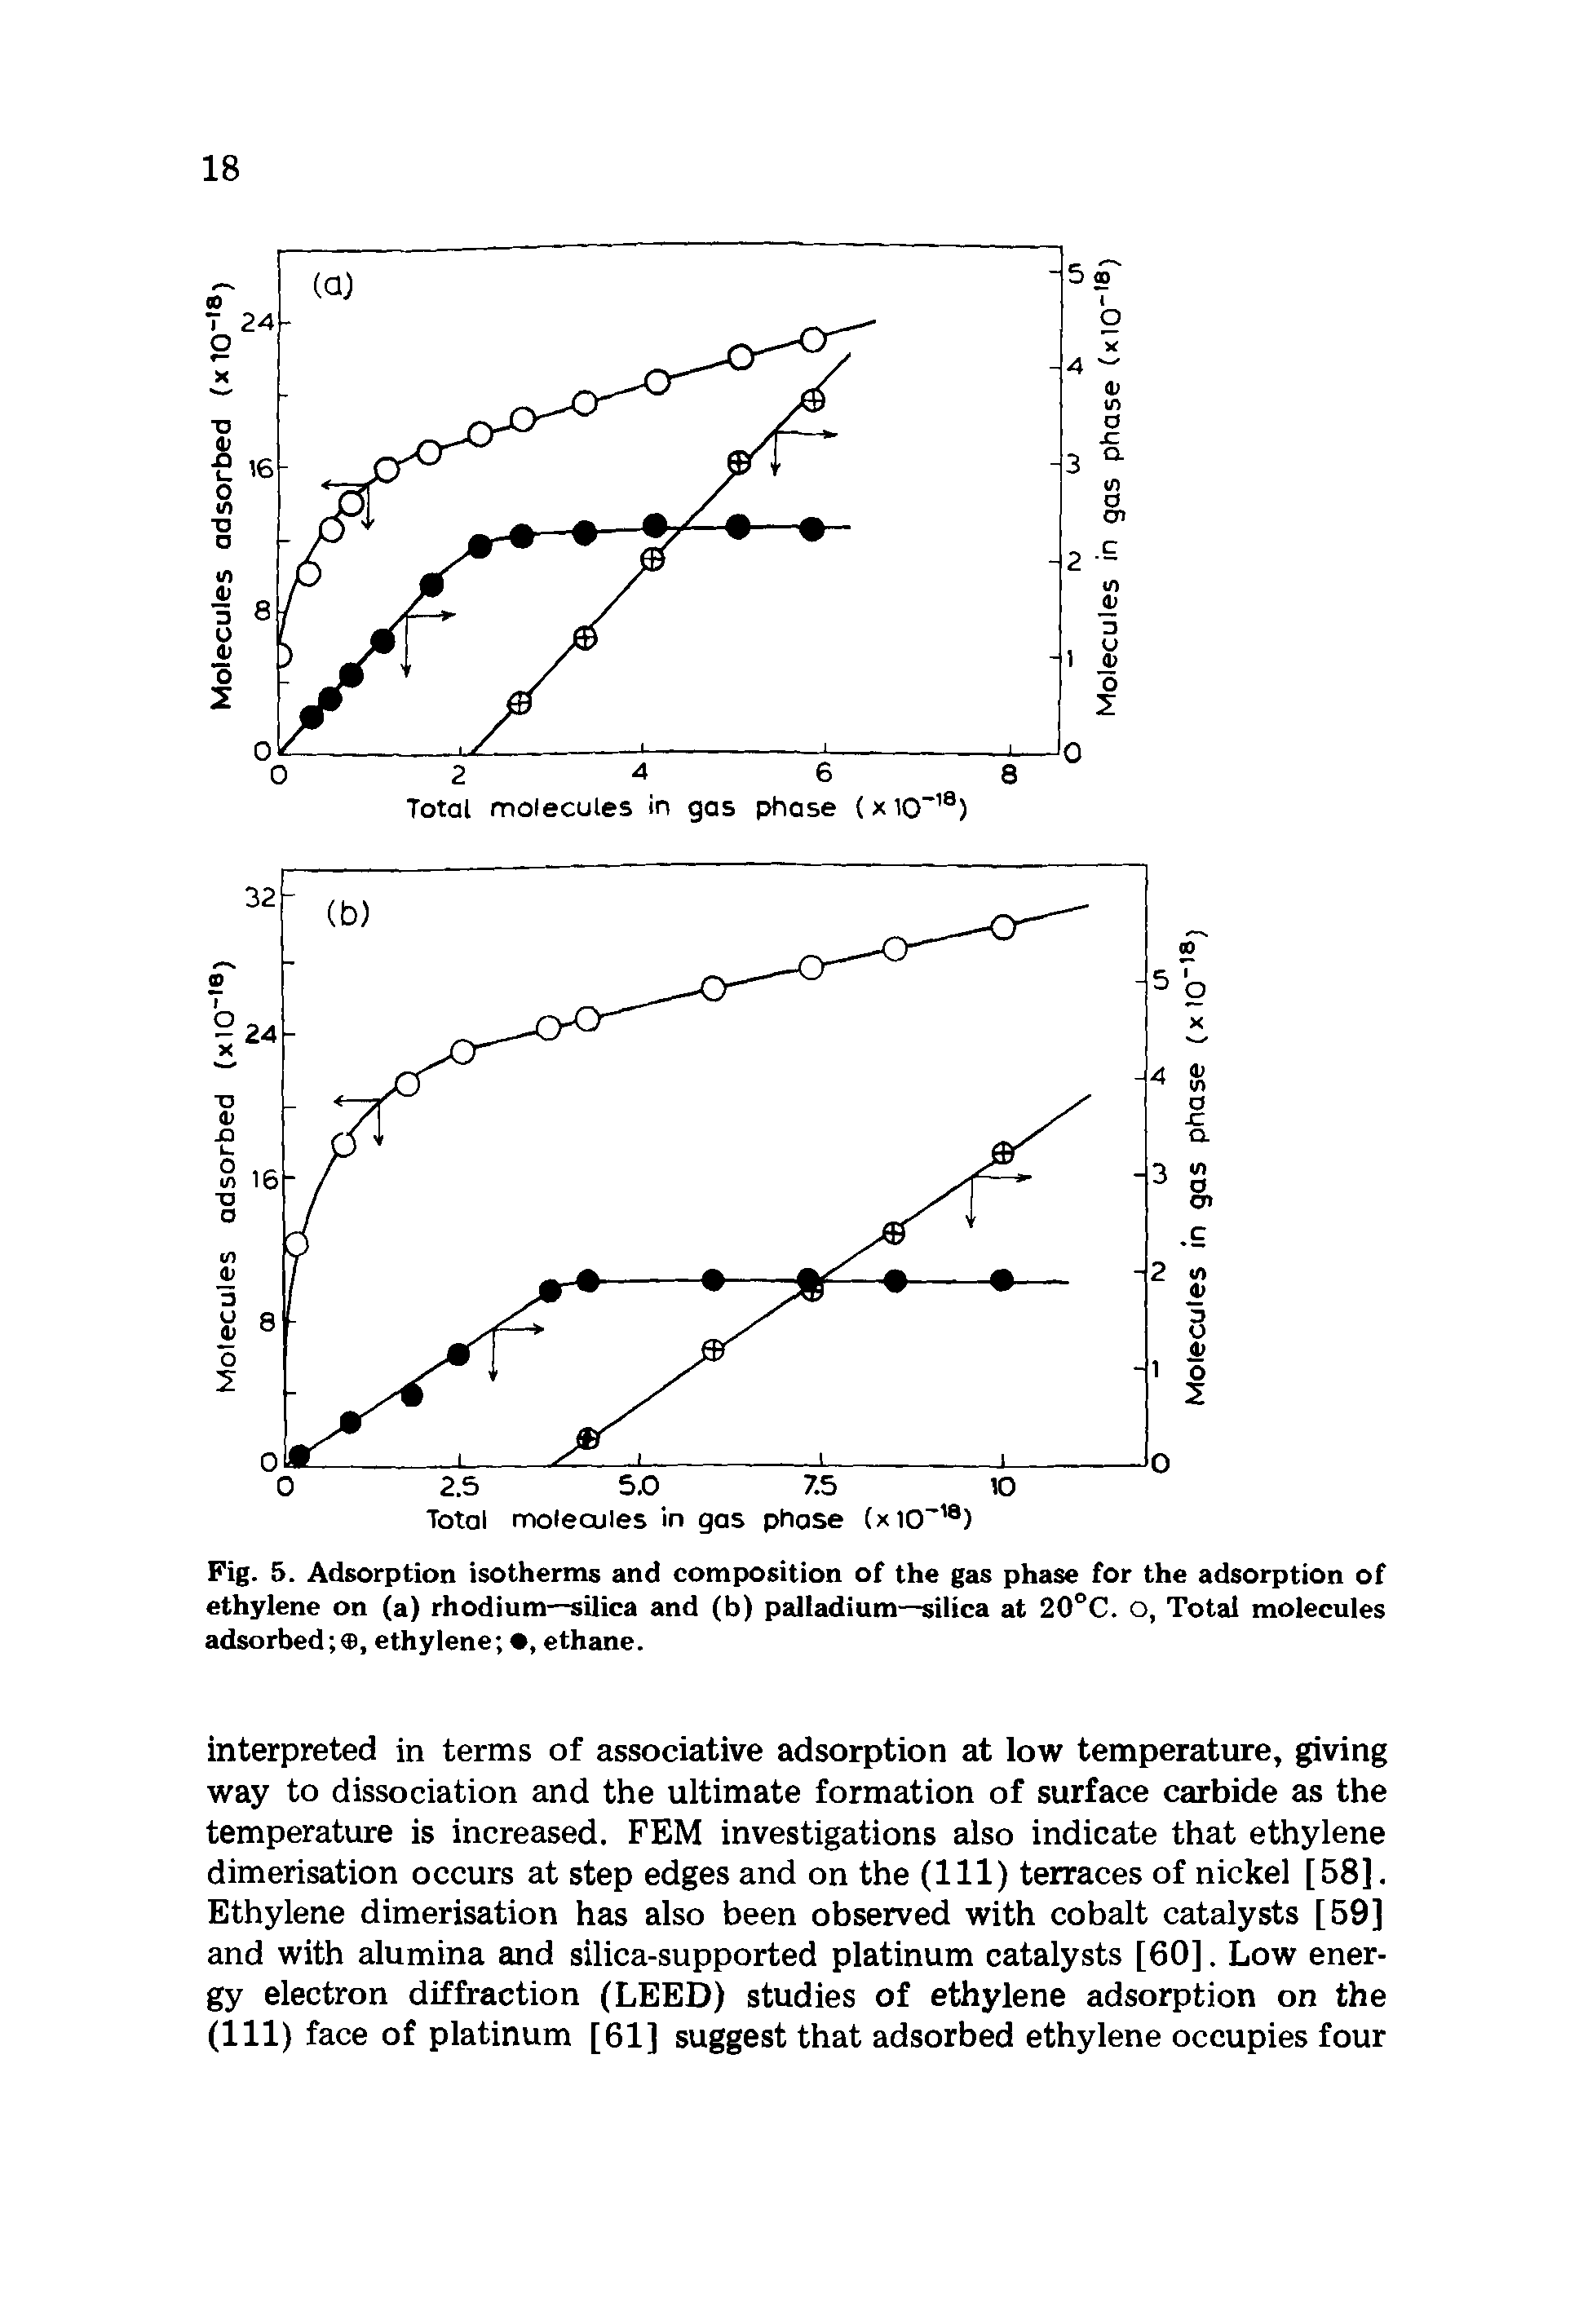 Fig. 5. Adsorption isotherms and composition of the gas phase for the adsorption of ethylene on (a) rhodium—silica and (b) palladium—silica at 20°C. o, Total molecules adsorbed , ethylene , ethane.